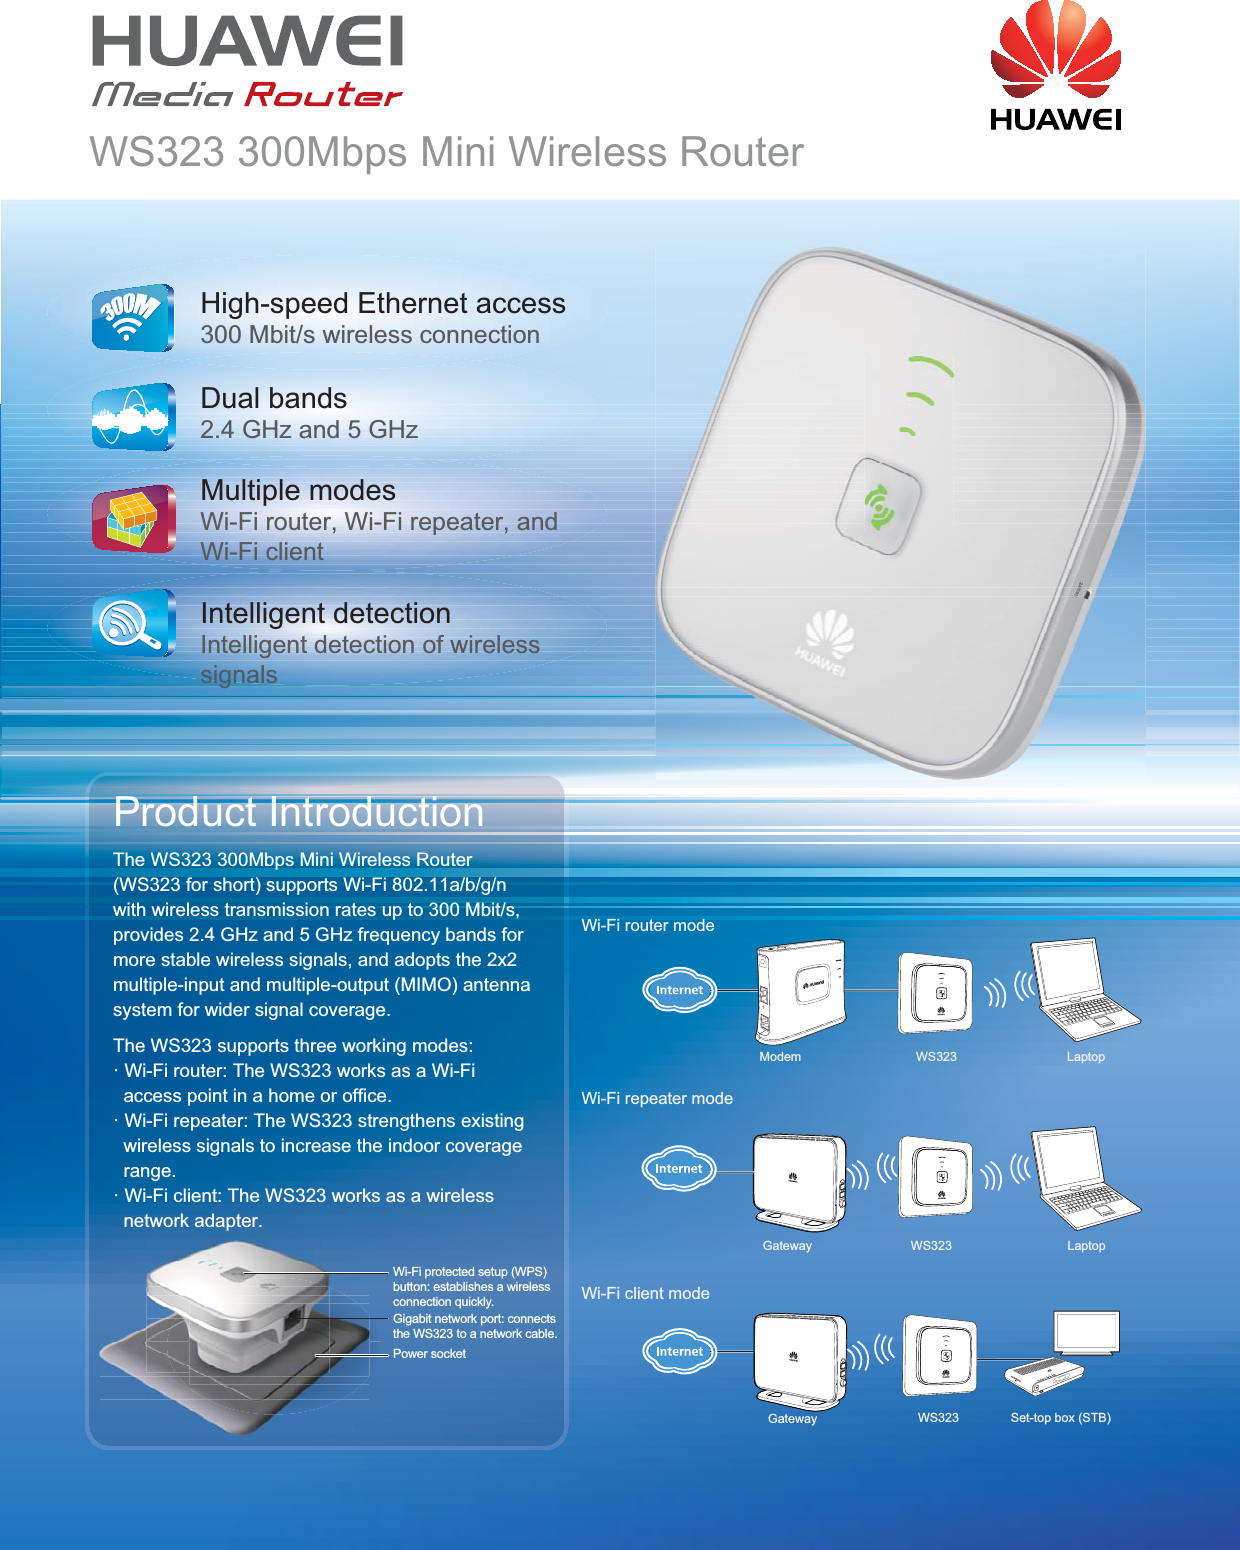 WS323 300Mbps Mini Wireless RouterHigh-speed Ethernet access300 Mbit/s wireless connectionDual bands2.4 GHz and 5 GHzMultiple modesWi-Fi router, Wi-Fi repeater, and Wi-Fi clientIntelligent detectionIntelligent detection of wireless signalsSet-top box (STB)WS323GatewayLaptopWS323Gateway Modem WS323 LaptopWi-Fi router modeWi-Fi repeater modeWi-Fi client modeThe WS323 300Mbps Mini Wireless Router (WS323 for short) supports Wi-Fi 802.11a/b/g/n with wireless transmission rates up to 300 Mbit/s, provides 2.4 GHz and 5 GHz frequency bands for more stable wireless signals, and adopts the 2x2 multiple-input and multiple-output (MIMO) antenna system for wider signal coverage.Product IntroductionThe WS323 supports three working modes:· Wi-Fi router: The WS323 works as a Wi-Fi access point in a home or office.· Wi-Fi repeater: The WS323 strengthens existing wireless signals to increase the indoor coverage range.· Wi-Fi client: The WS323 works as a wireless network adapter.Power socketWi-Fi protected setup (WPS) button: establishes a wireless connection quickly.Gigabit network port: connects the WS323 to a network cable.WWHWHWHWHWHWHVHVHVHHHVH5H5HV5HVHVHV5H5H5555